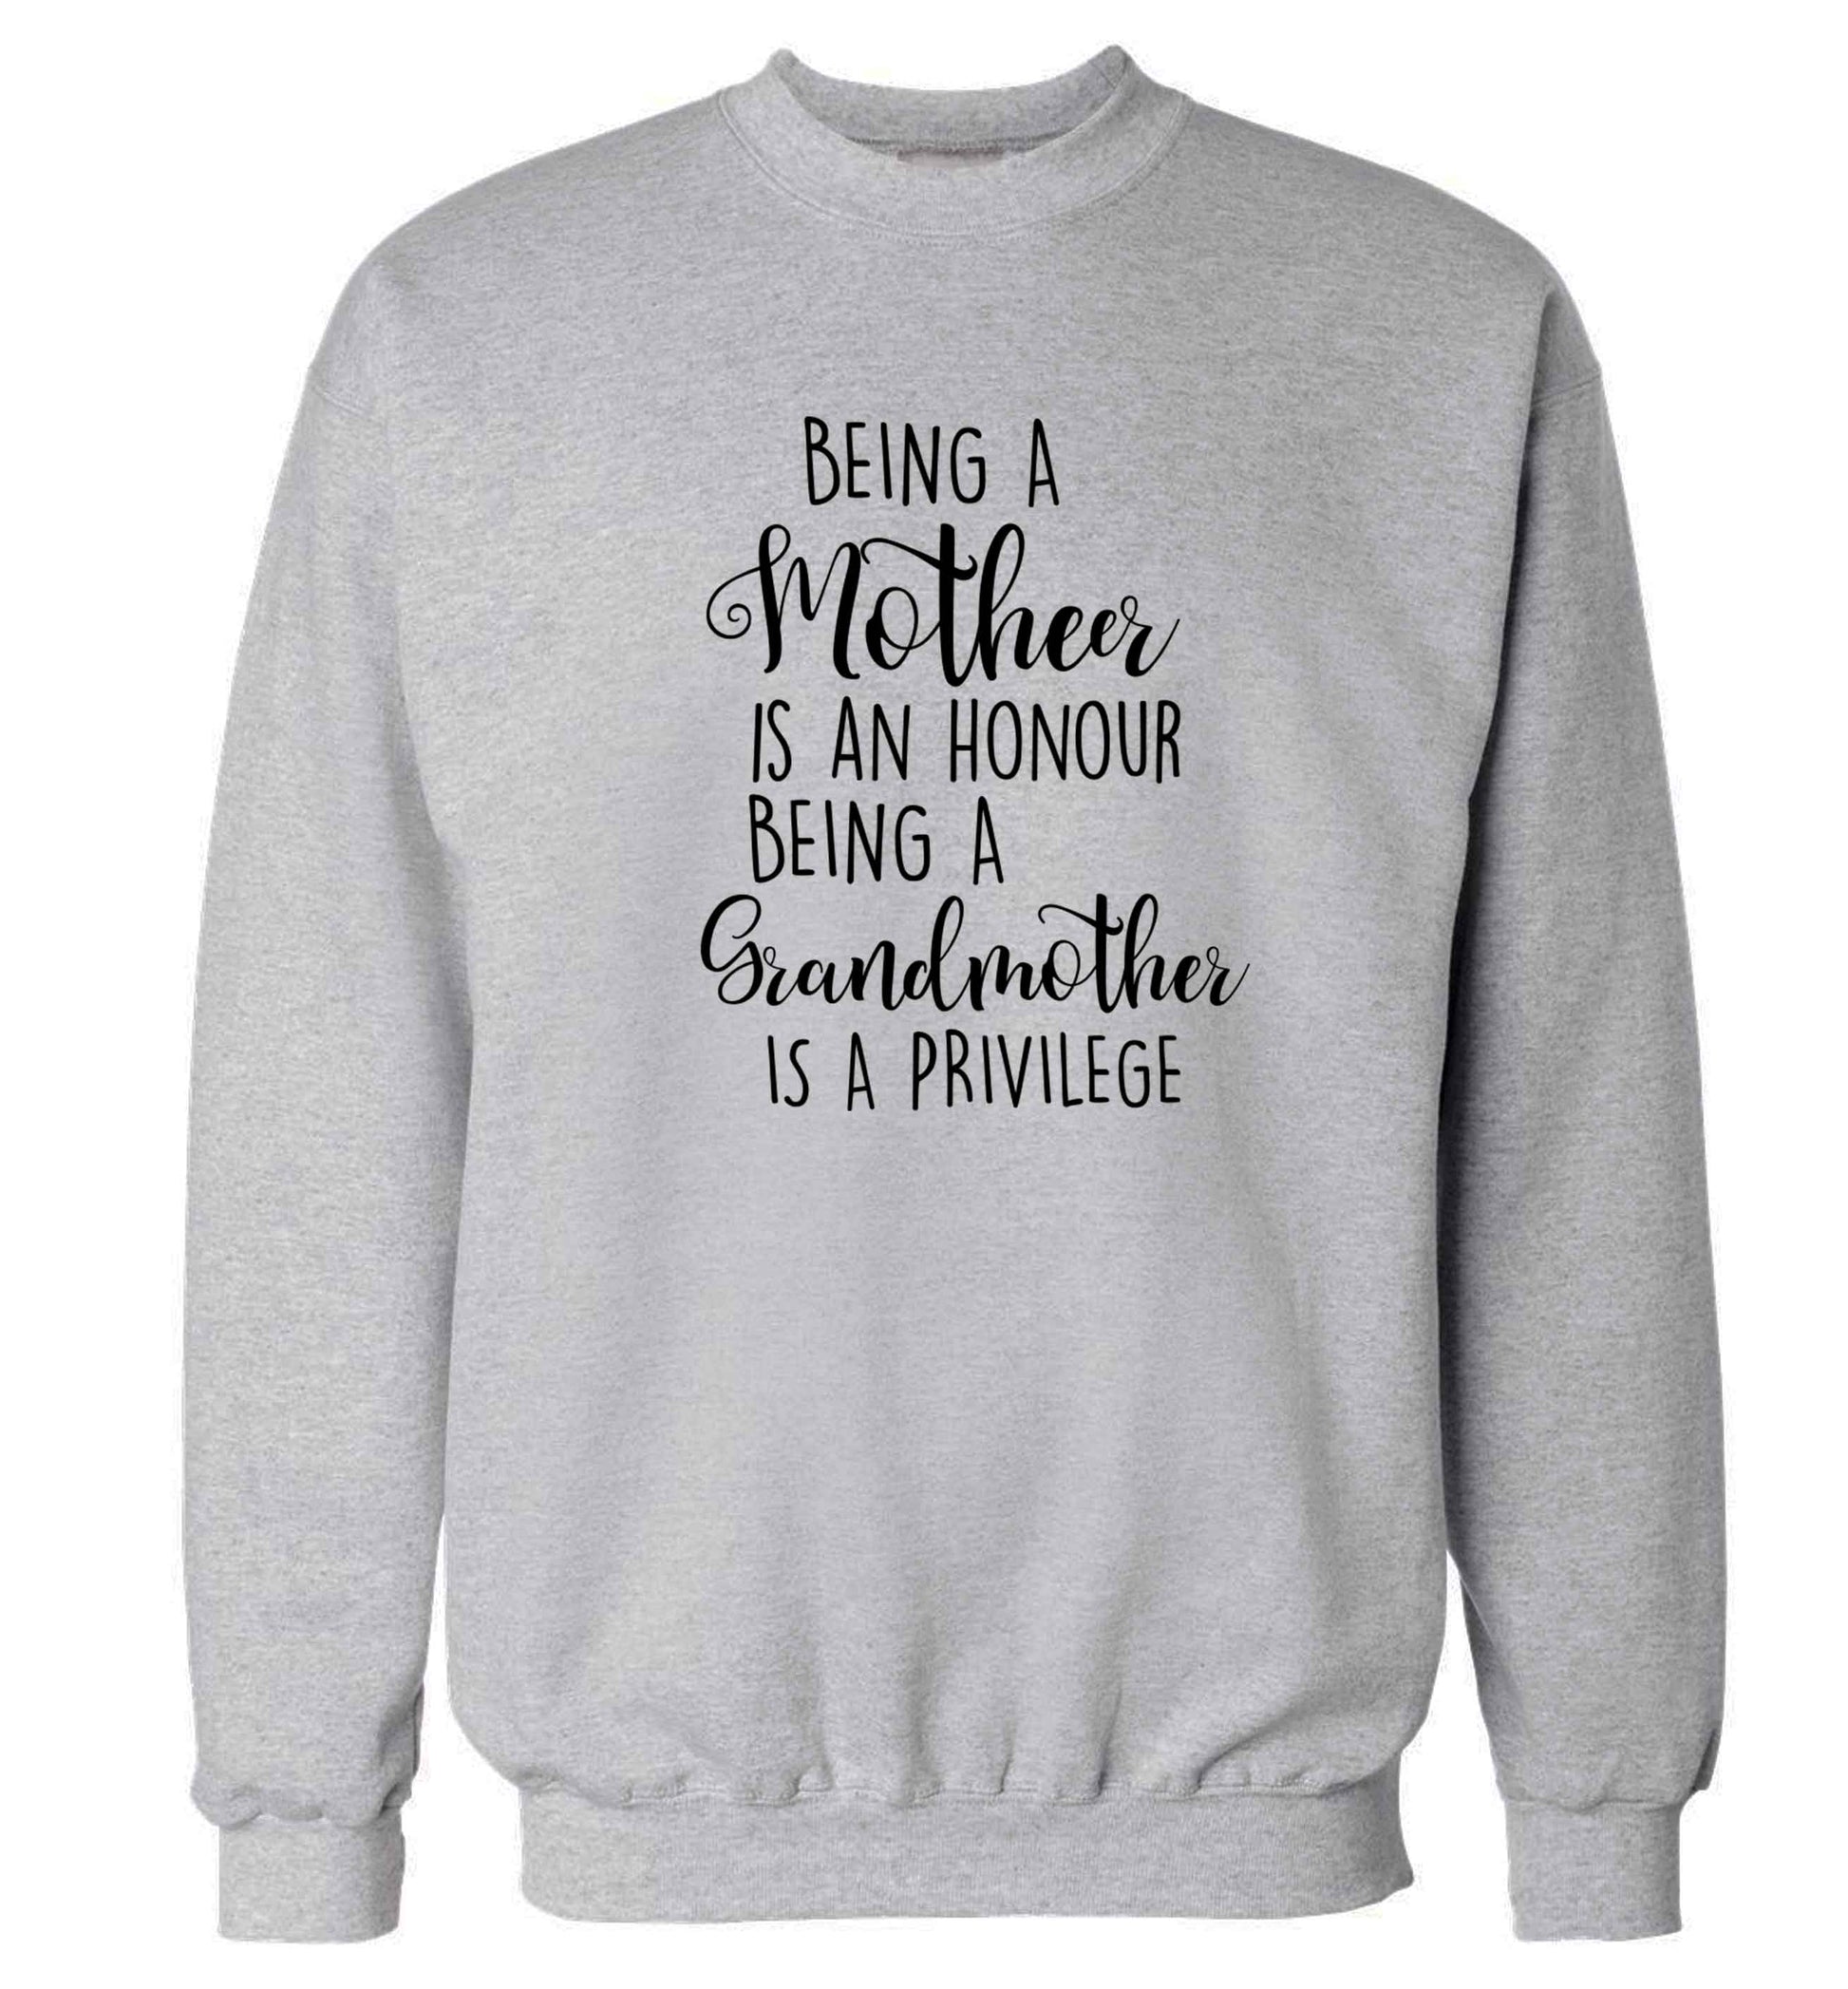 Being a mother is an honour being an grandmother is a privilege Adult's unisex grey Sweater 2XL